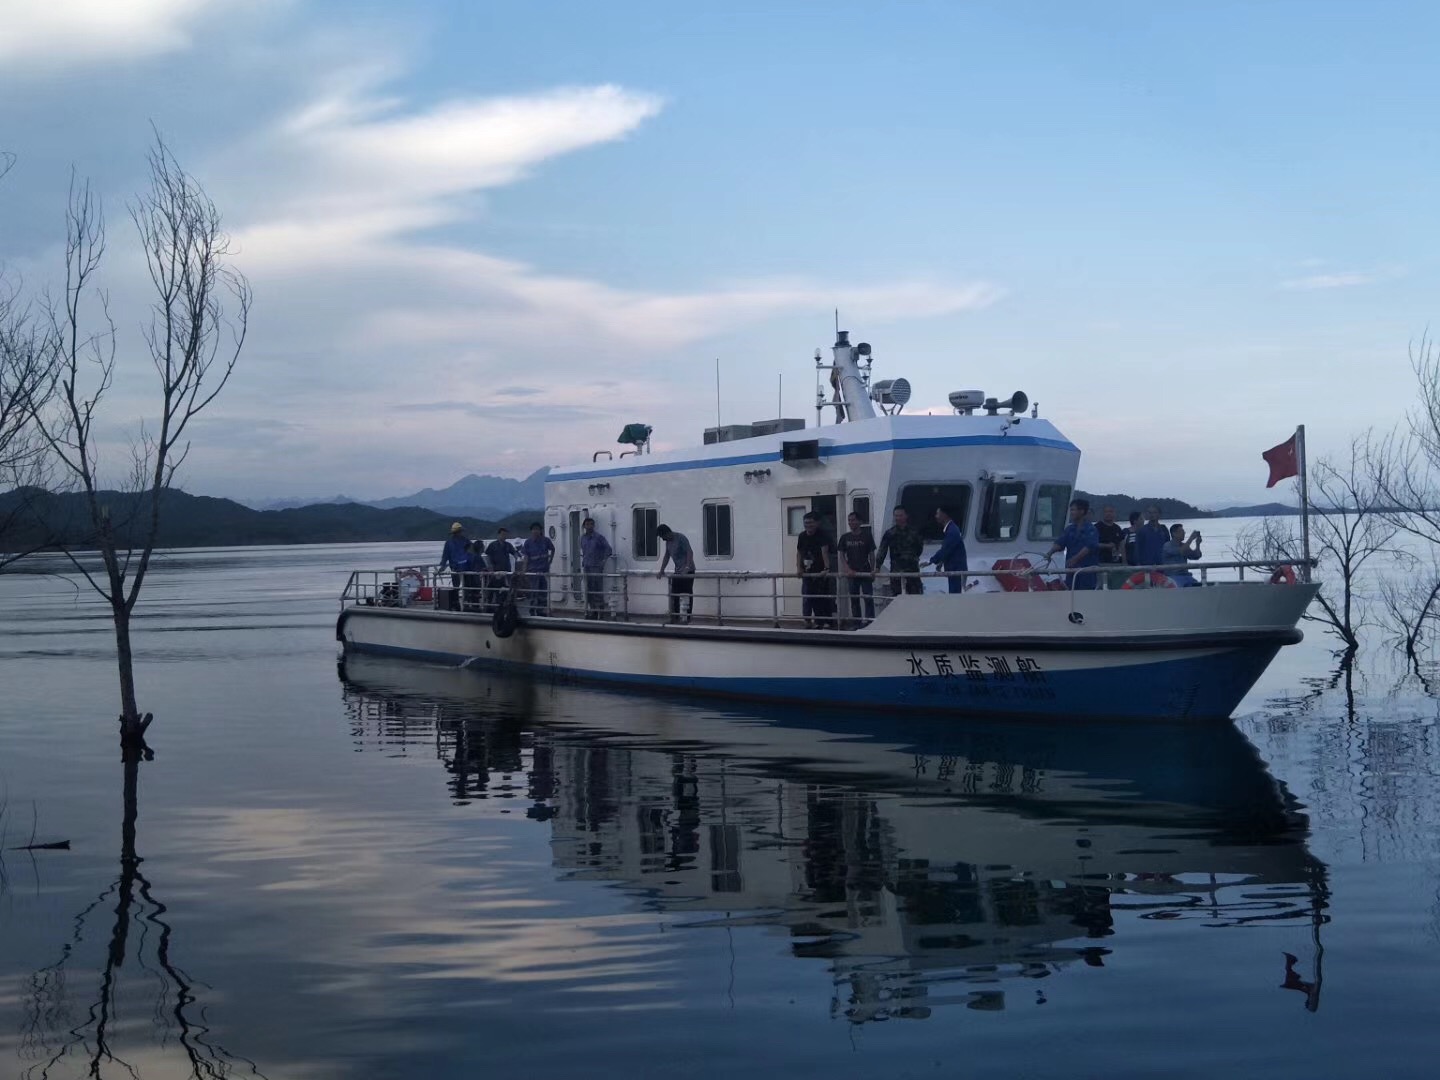 Water quality monitoring vessel for Miyun Reservoir